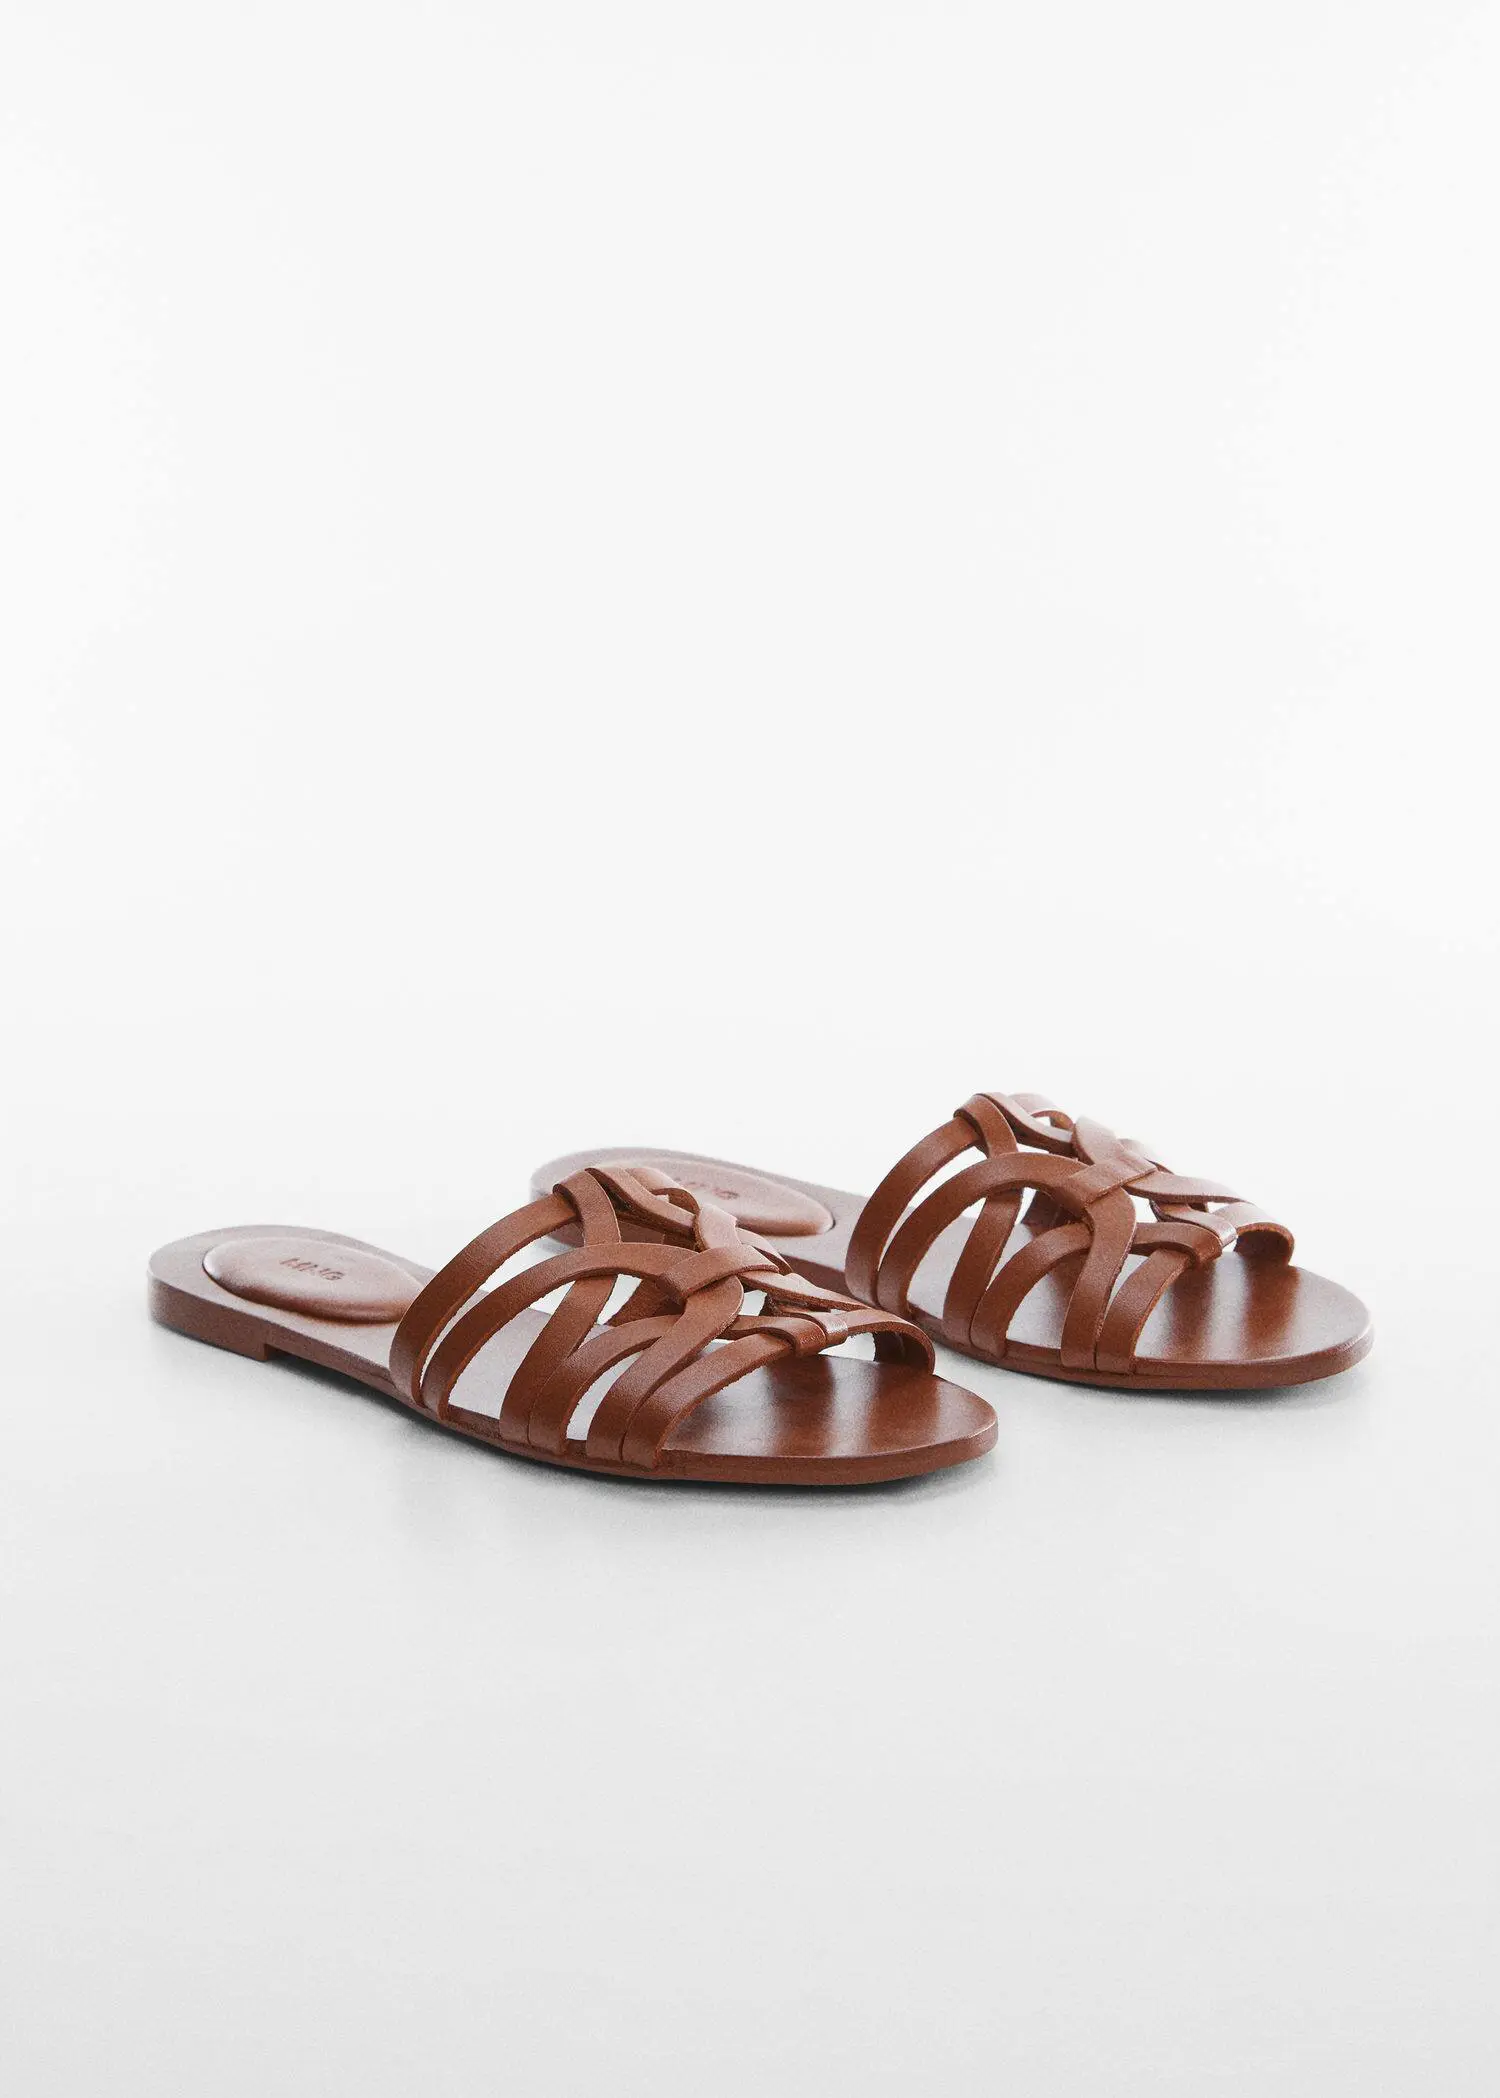 Mango Leather straps sandals. a pair of brown sandals sitting on top of a white surface. 